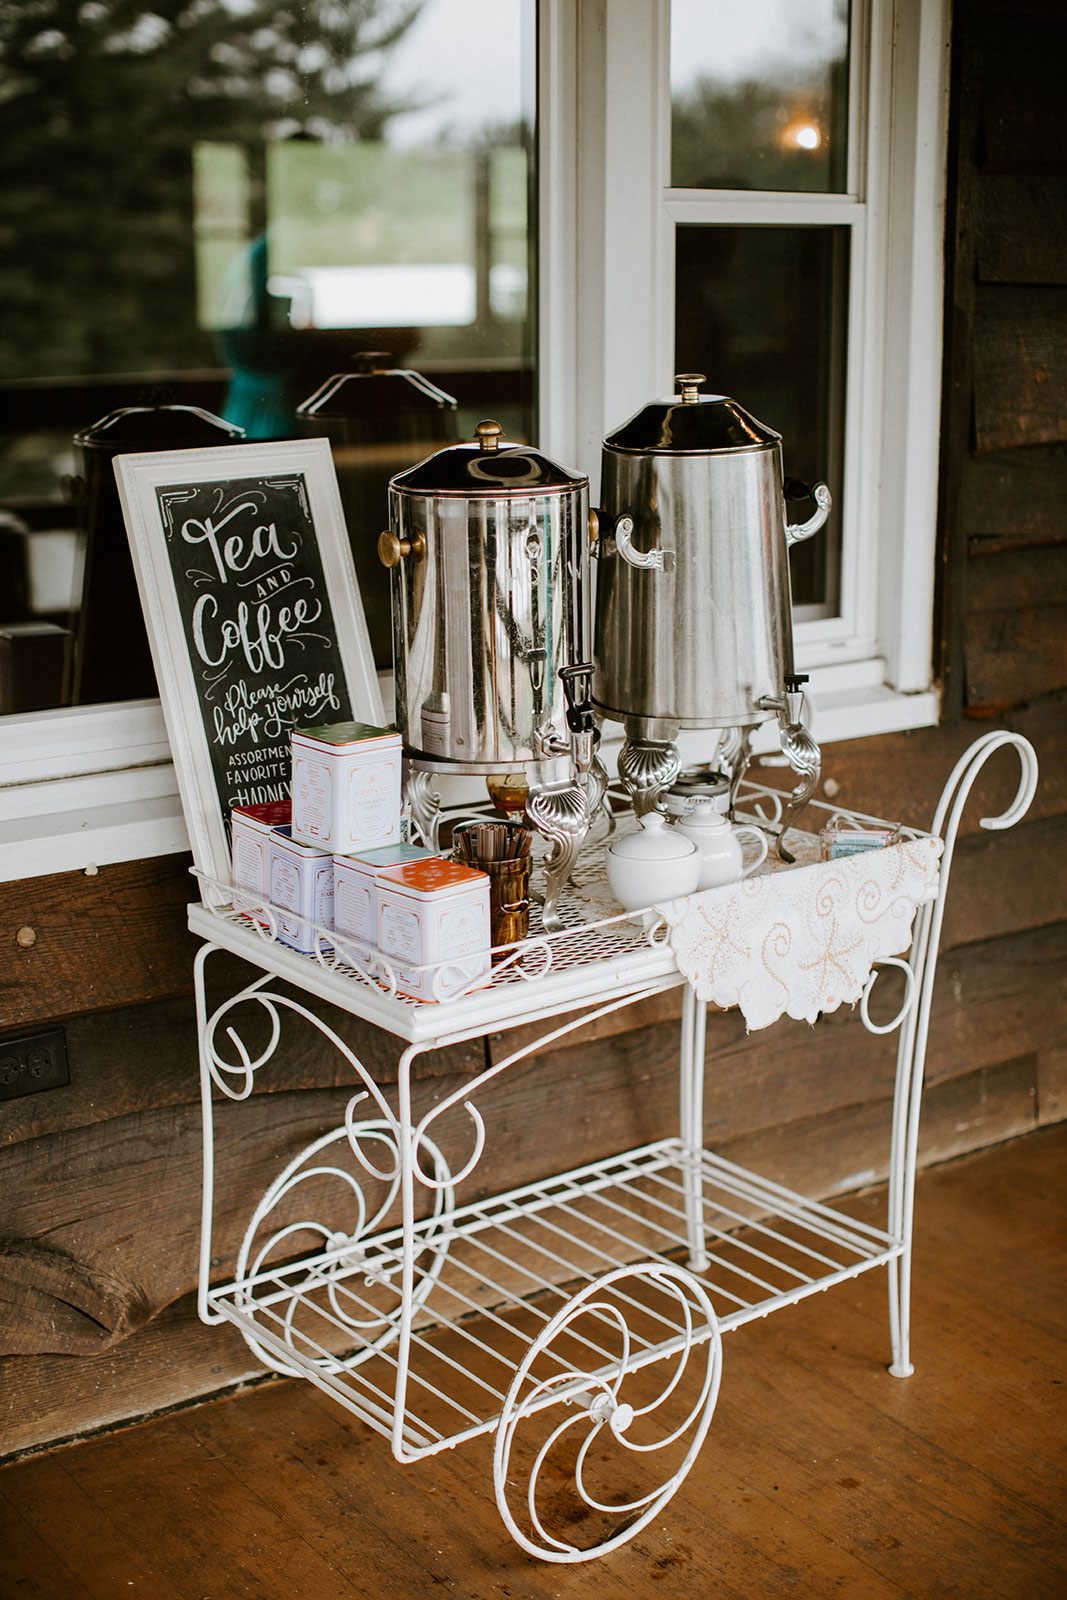 Tea and coffee station - tea party baby shower inspiration - Harney & Sons teas